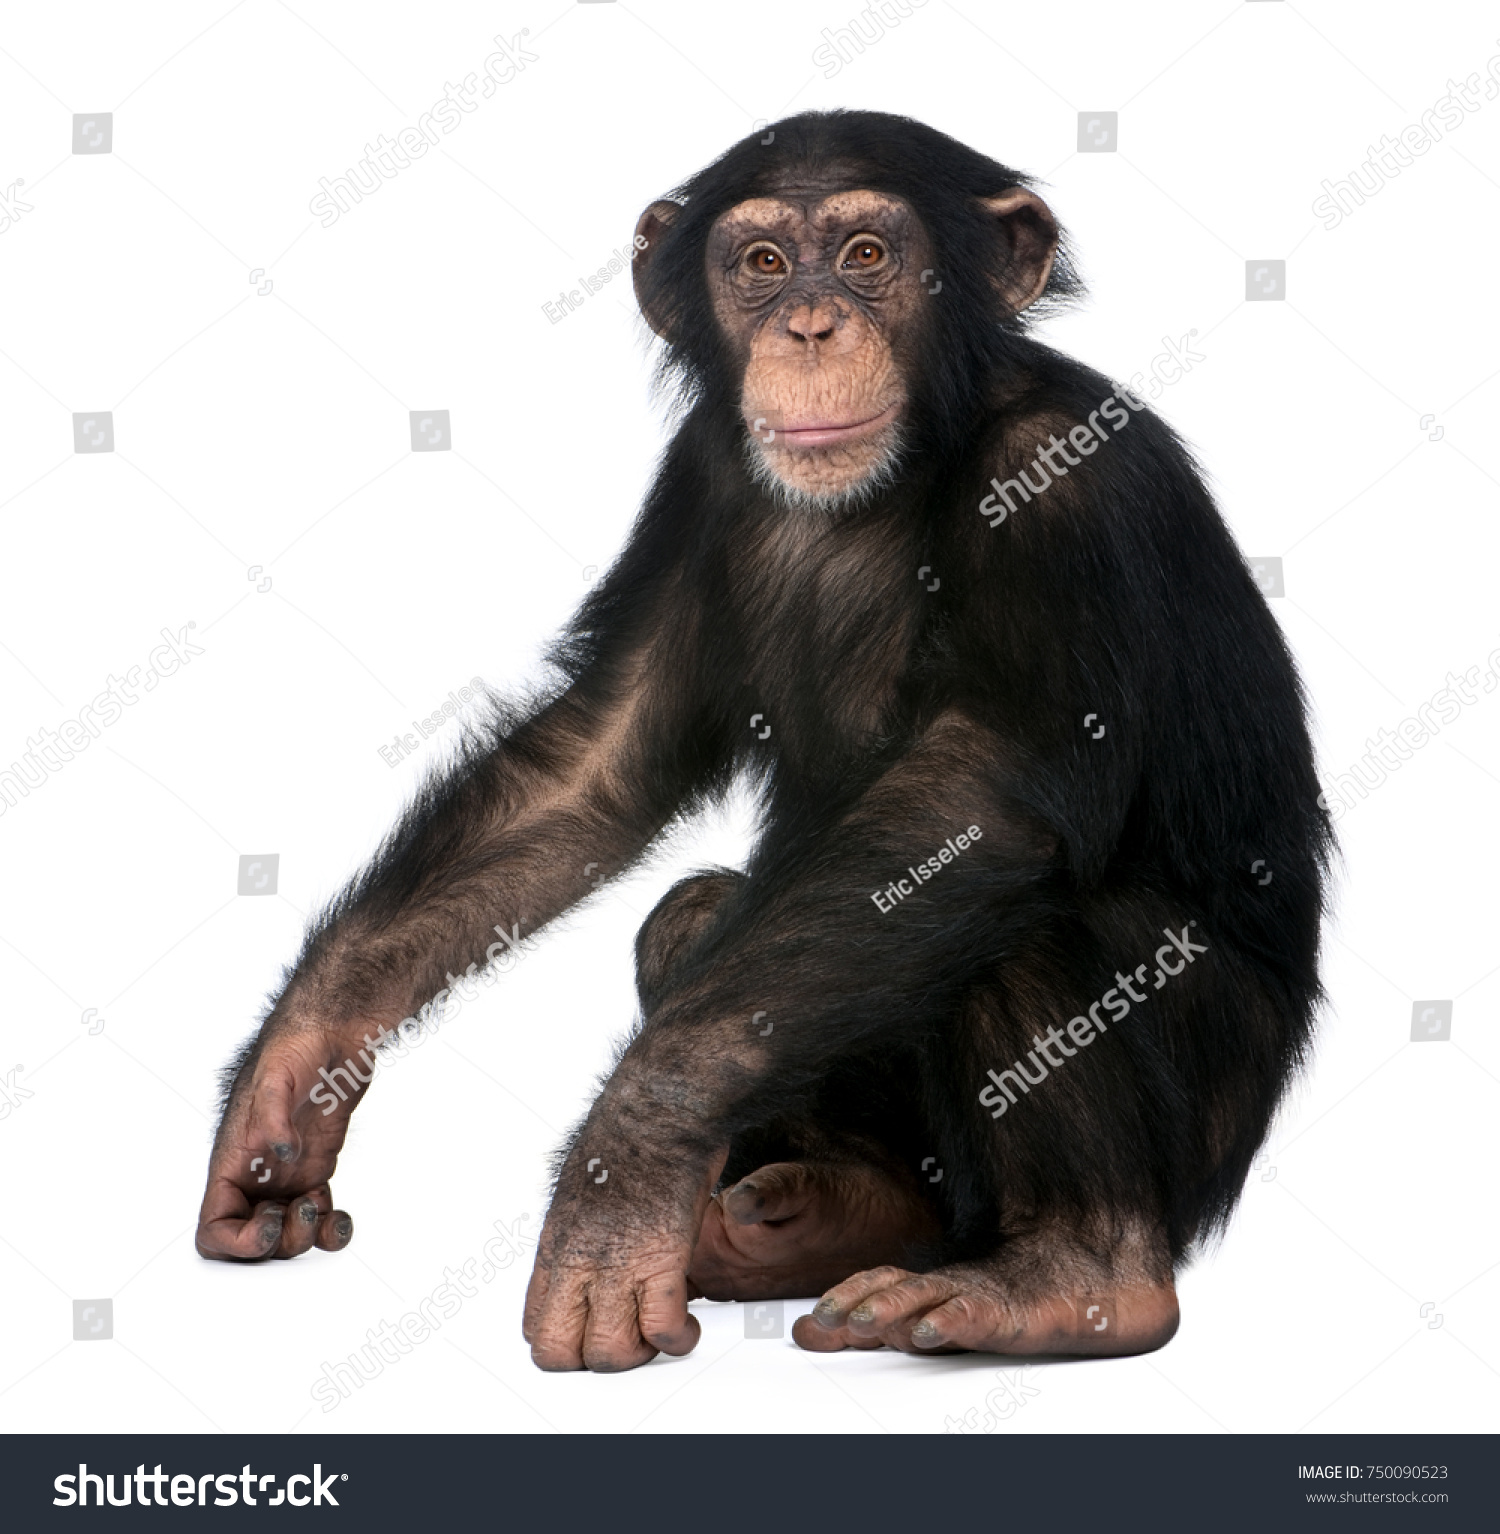 Young Chimpanzee, Simia troglodytes, 5 years old, sitting in front of white background #750090523